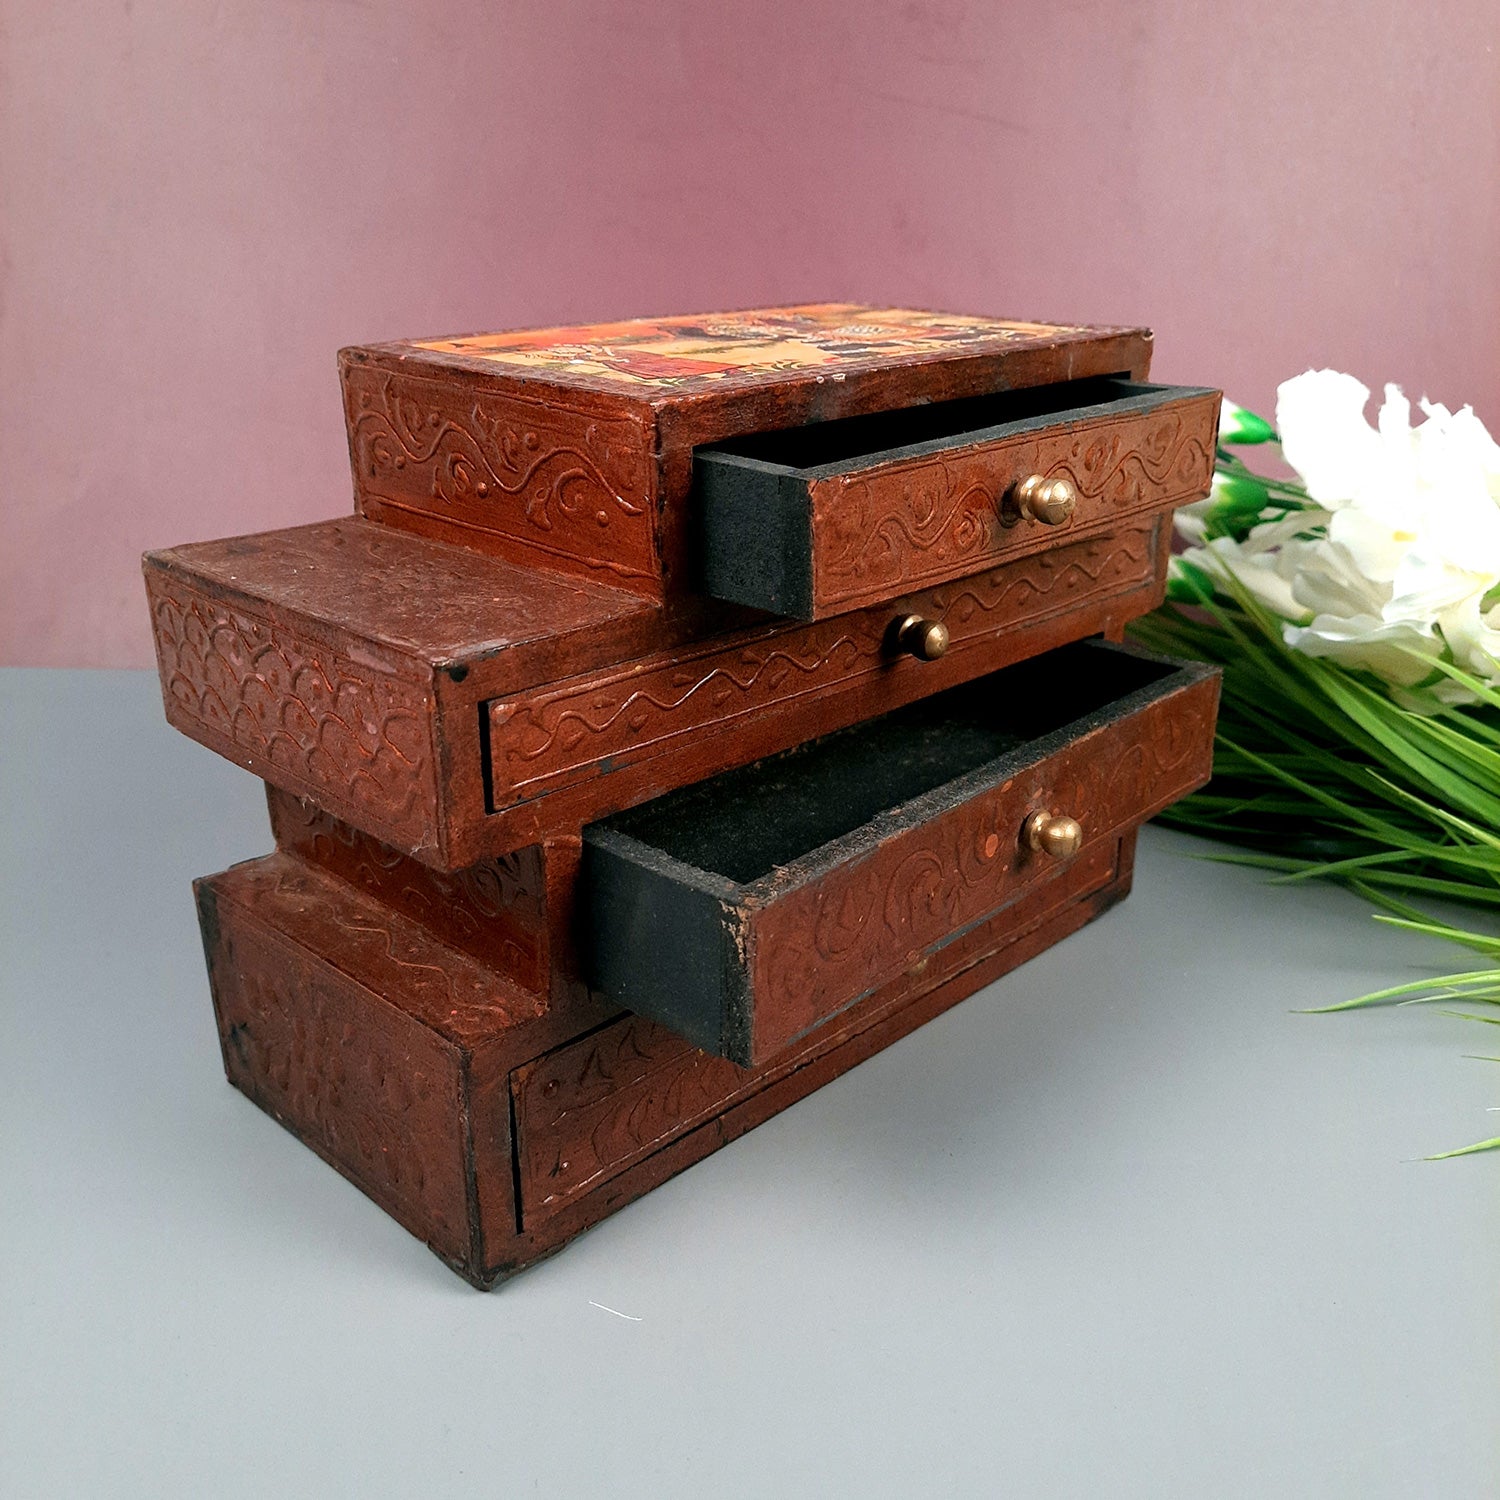 Jewellery Box | Decorative Wooden Jewelry Box - For Earring, Necklace & Gifts - 7 Inch - Apkamart